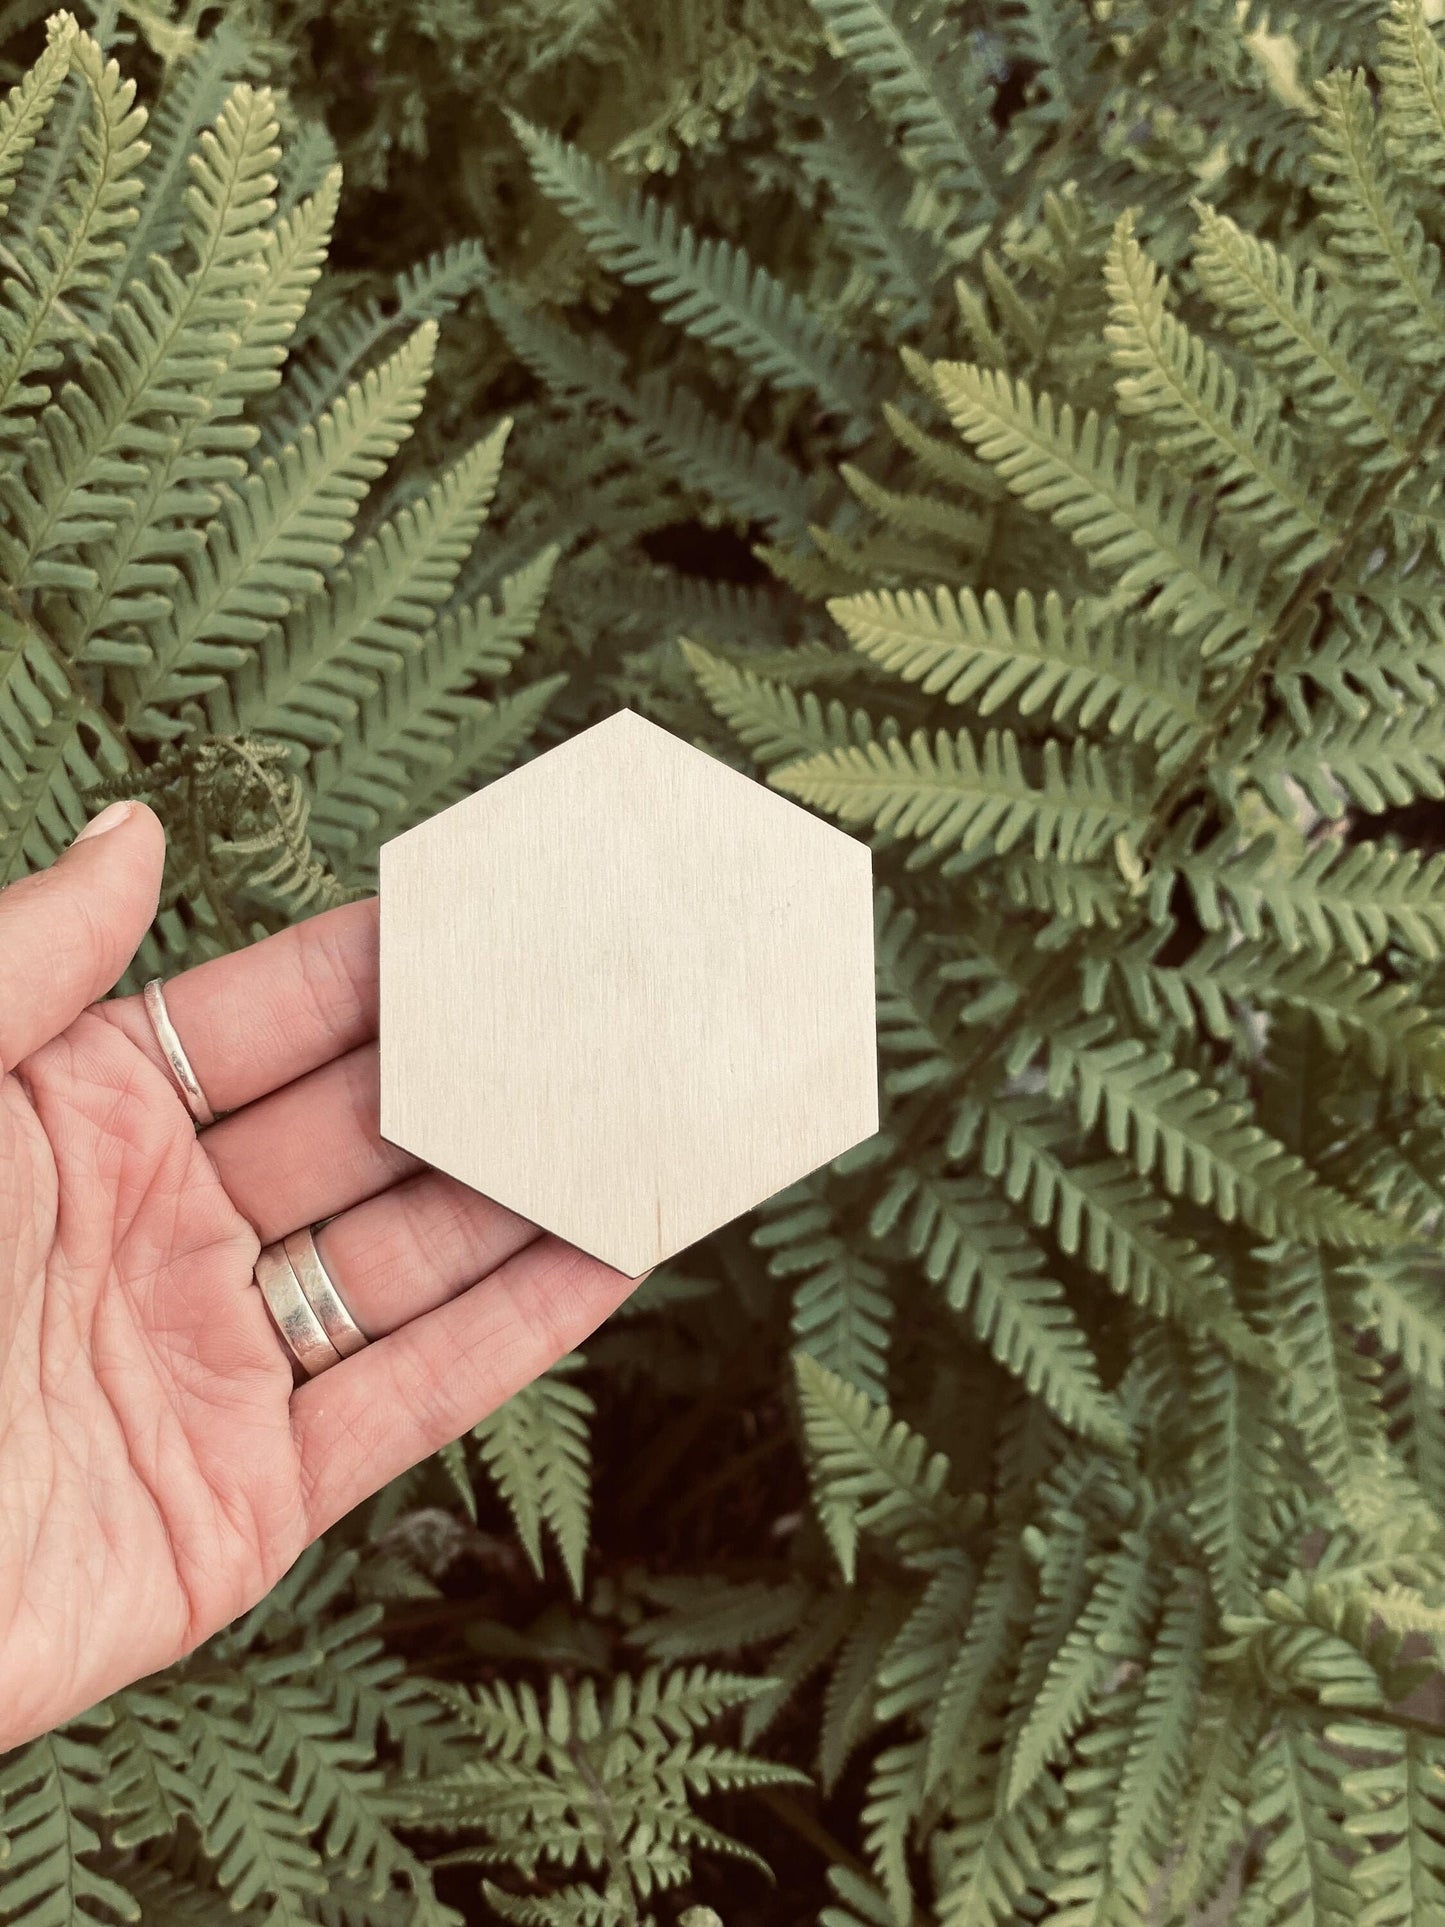 10x Wooden Hexagons / Hollow Hexagons from 30mm Wide  | 3mm Thick Laser Cut Plywood Blanks | Craft Shapes